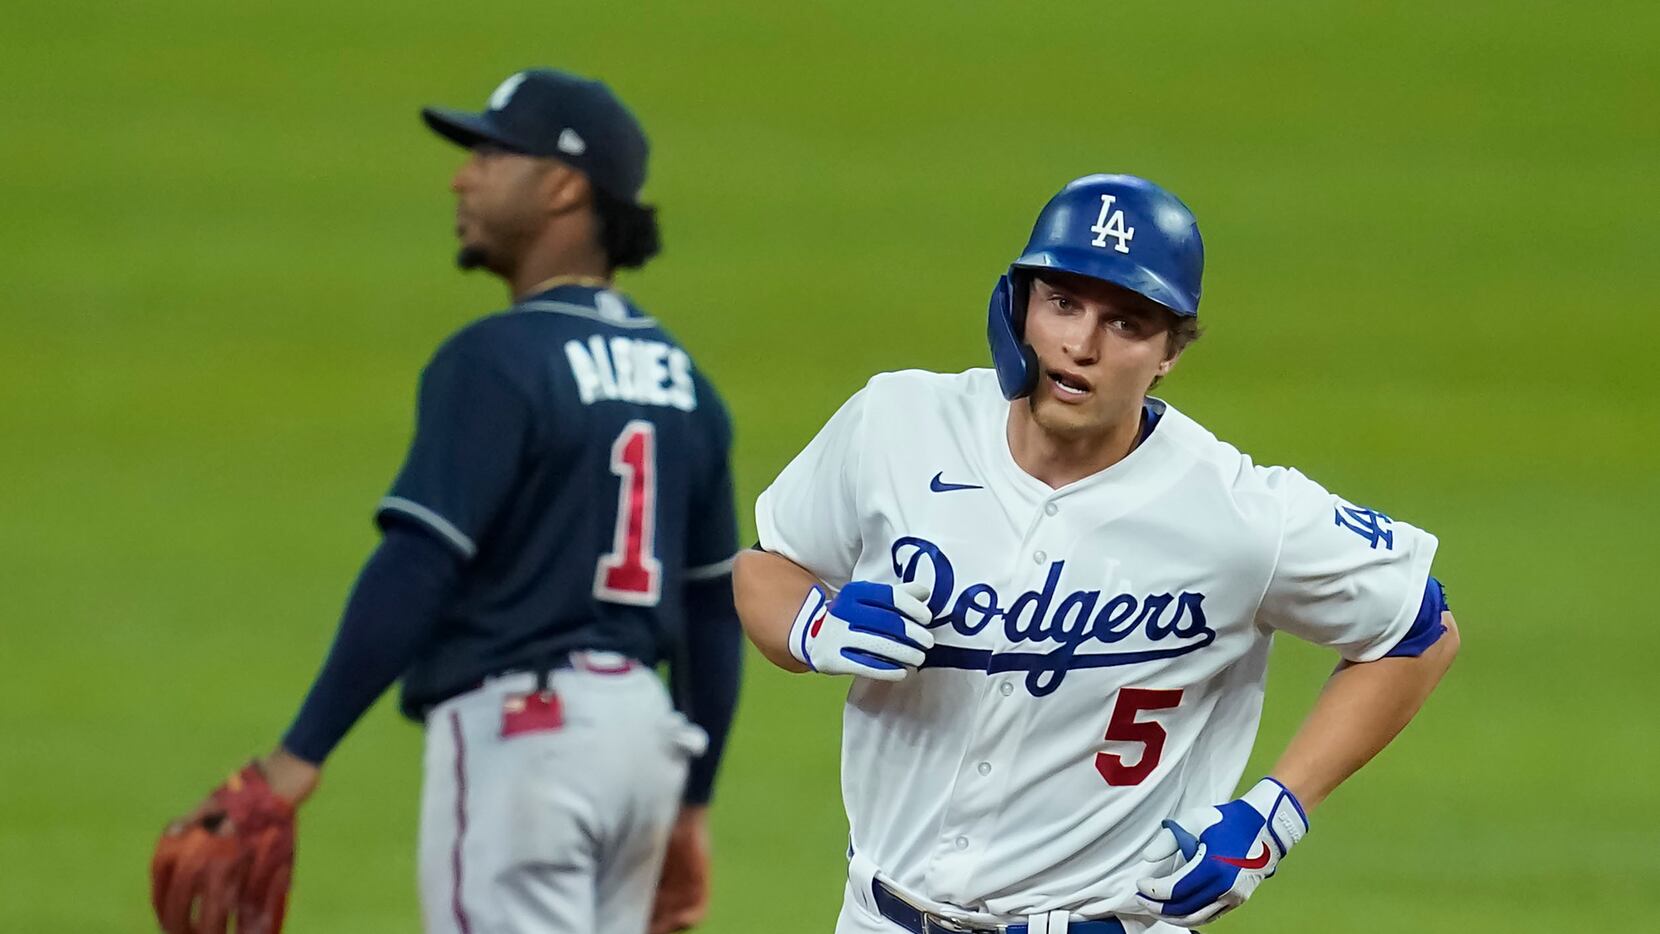 Rangers hope Corey Seager, Marcus Semien can be pillars of sturdy,  sustainable championship model